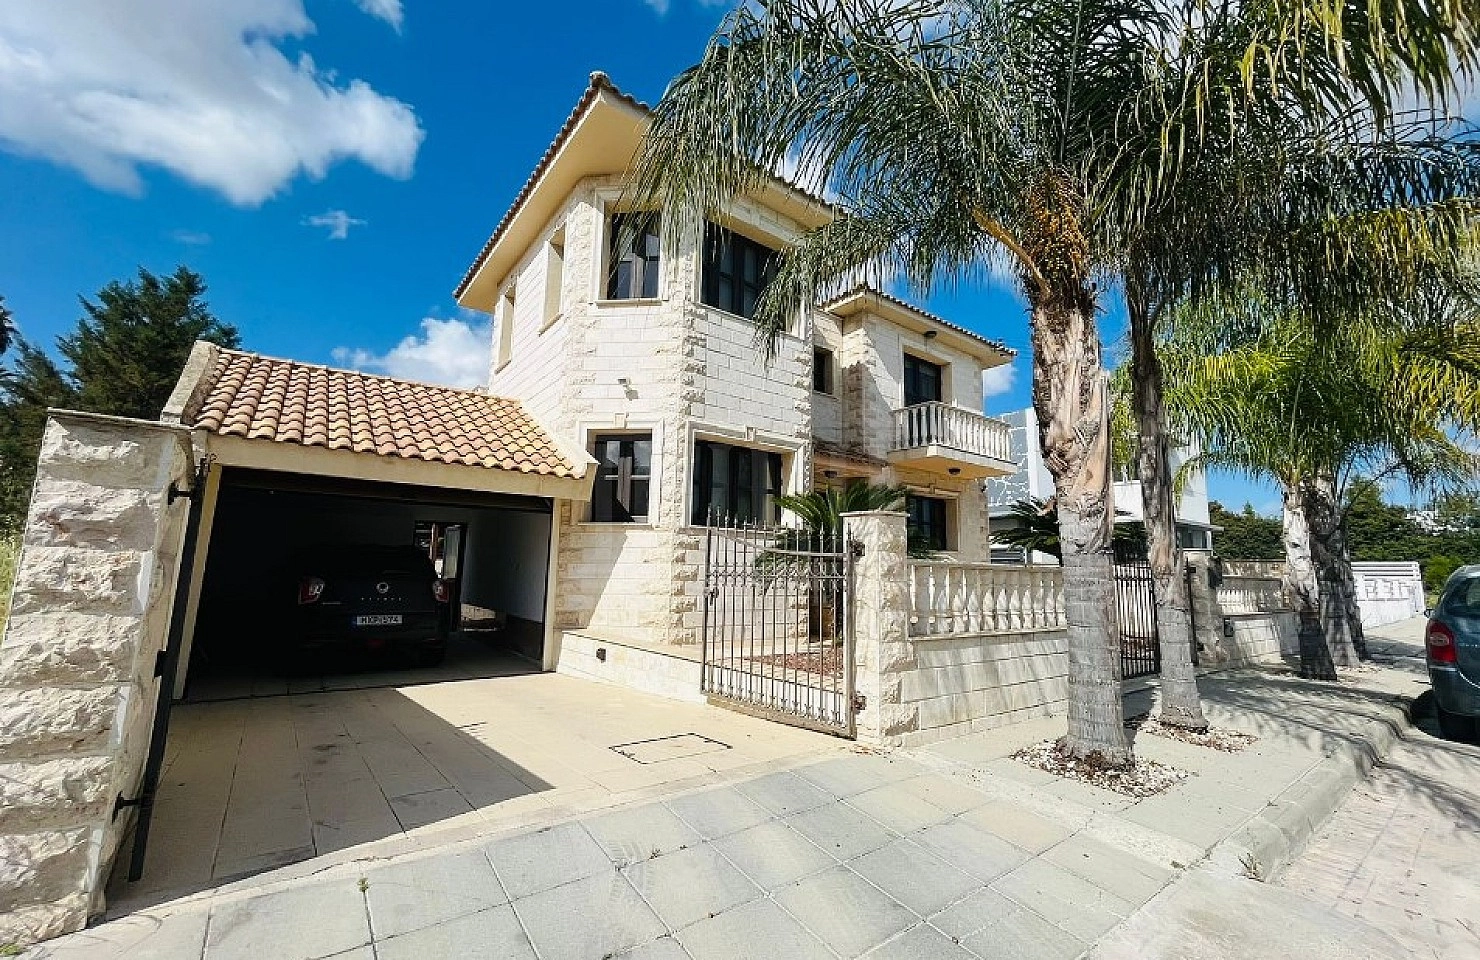 5 Bedroom House for Sale in Larnaca District